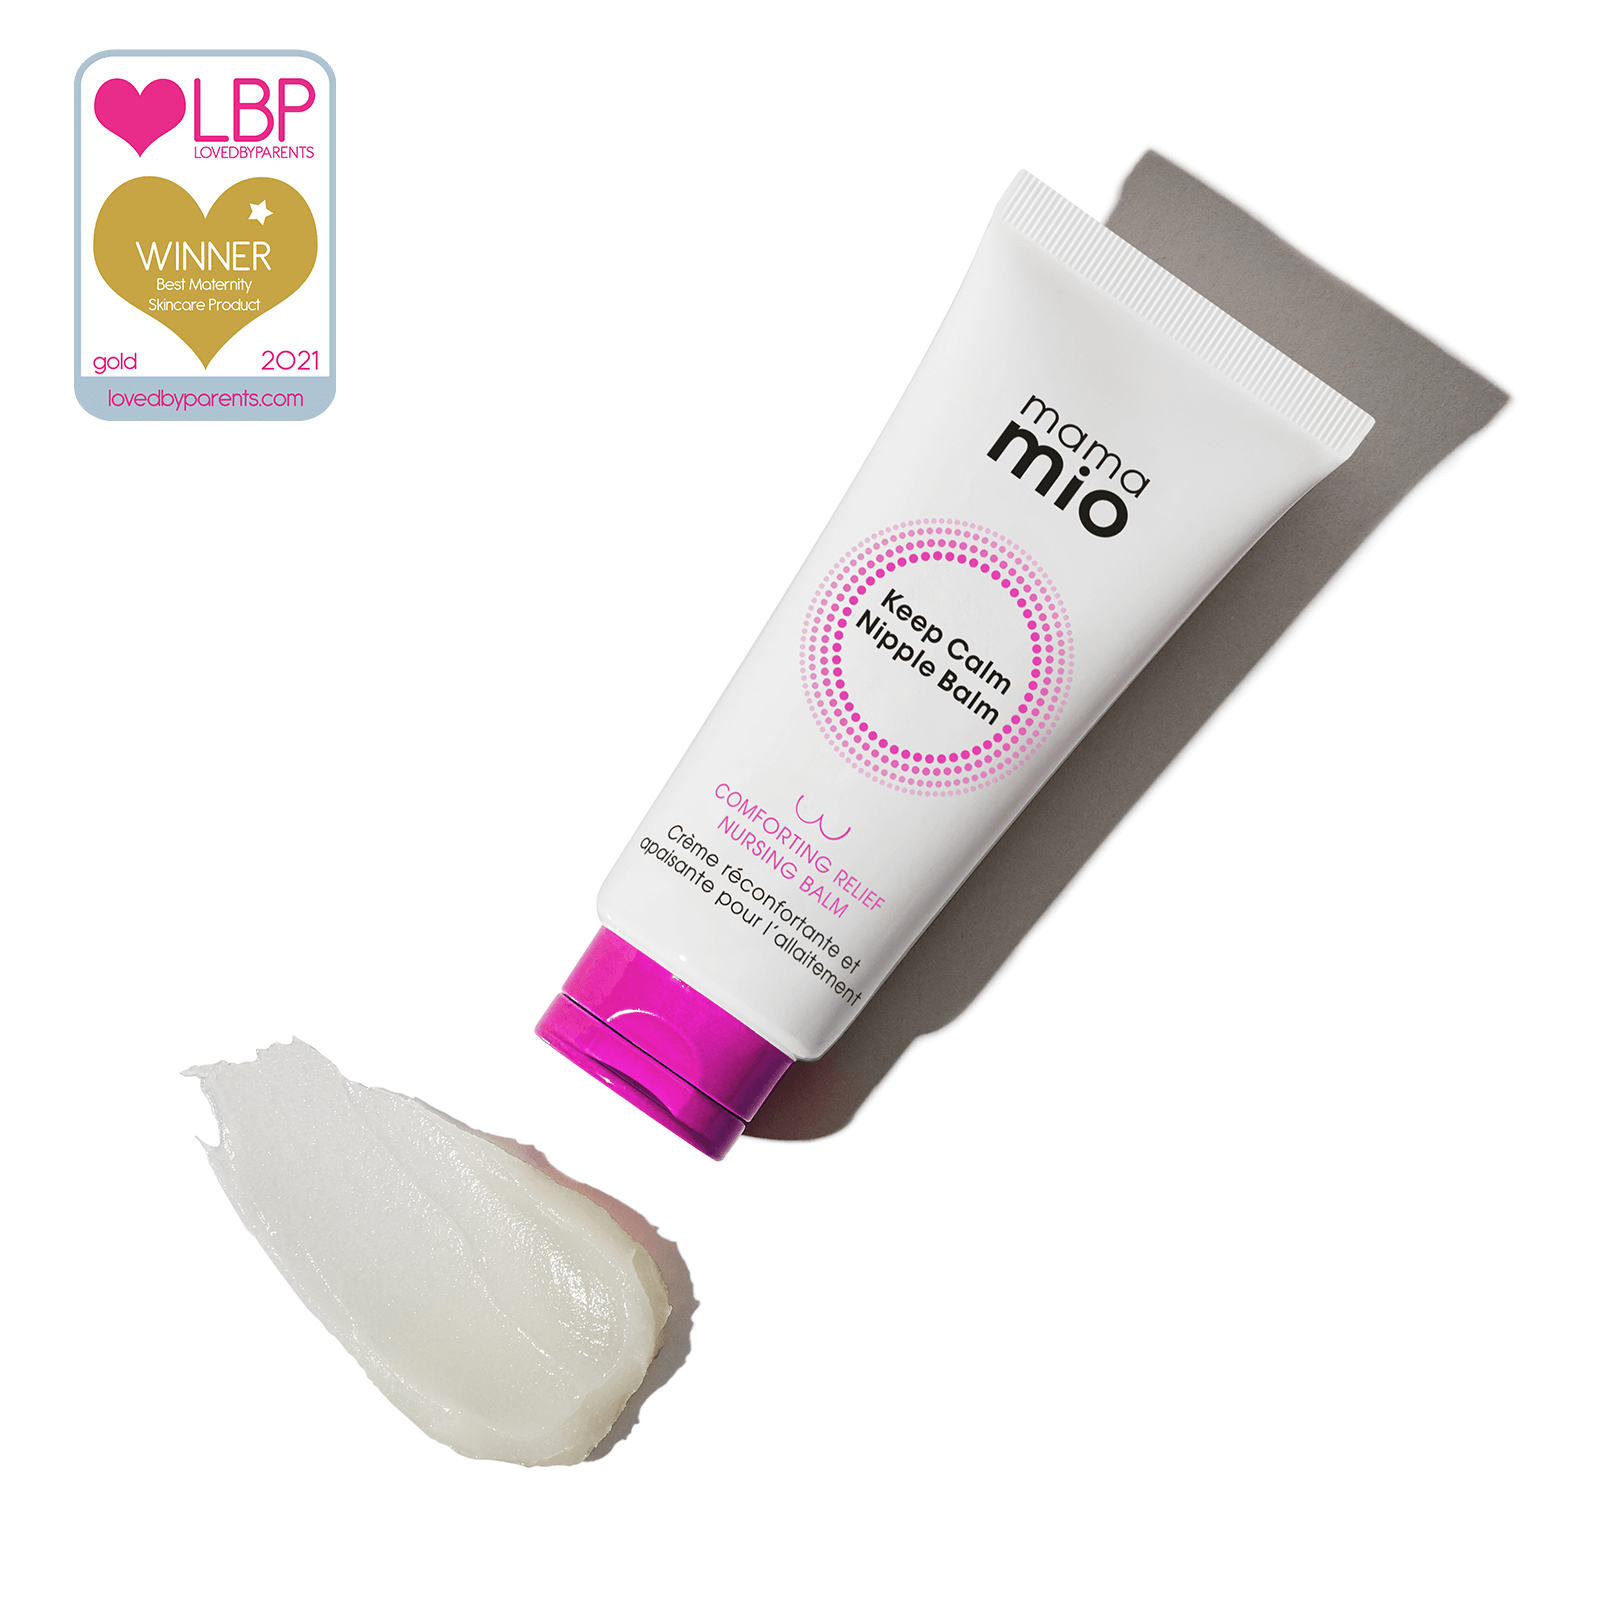 Keep Calm Nipple Balm. Lovedbyparents Best Maternity Skincare Product 2021.